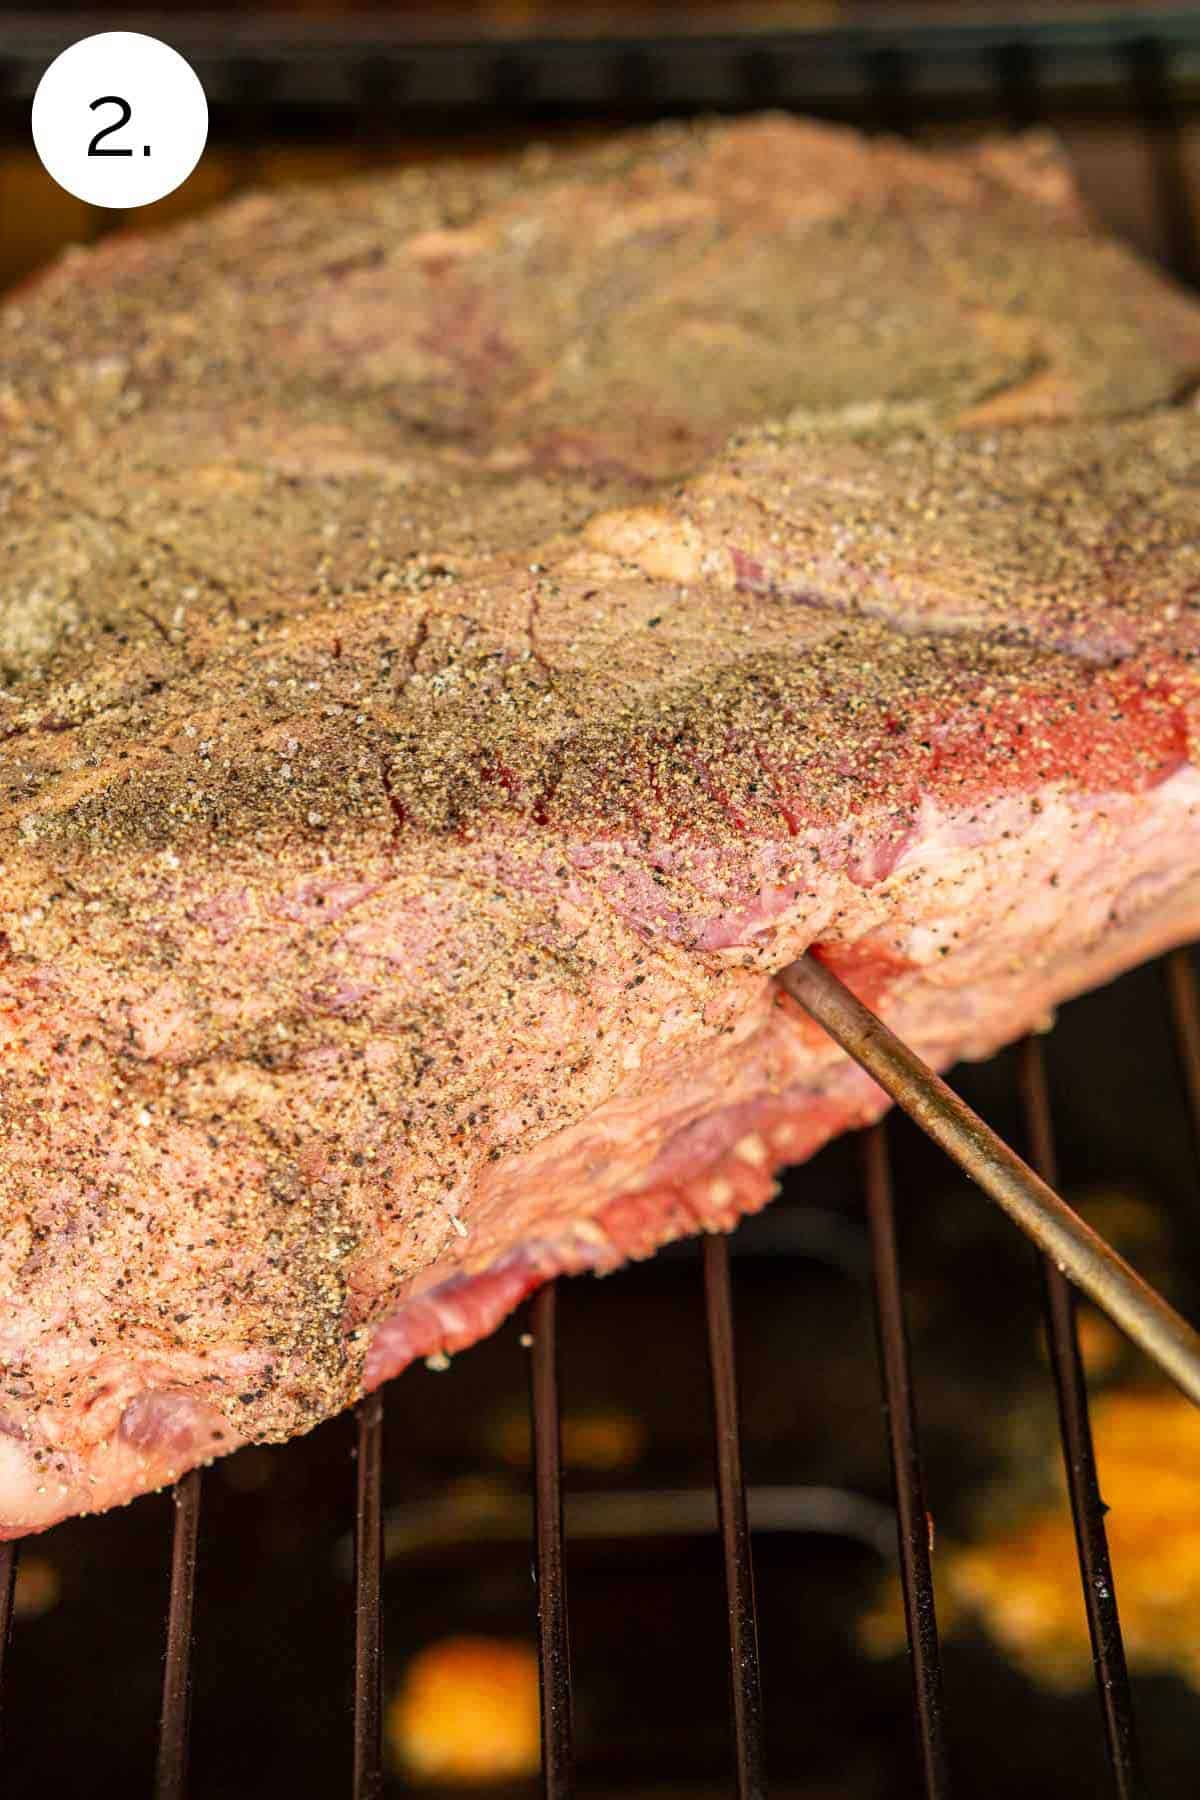 The chuck roast on the grill grates of the smoker with a leave-in meat thermometer inserted in the center of the meat.